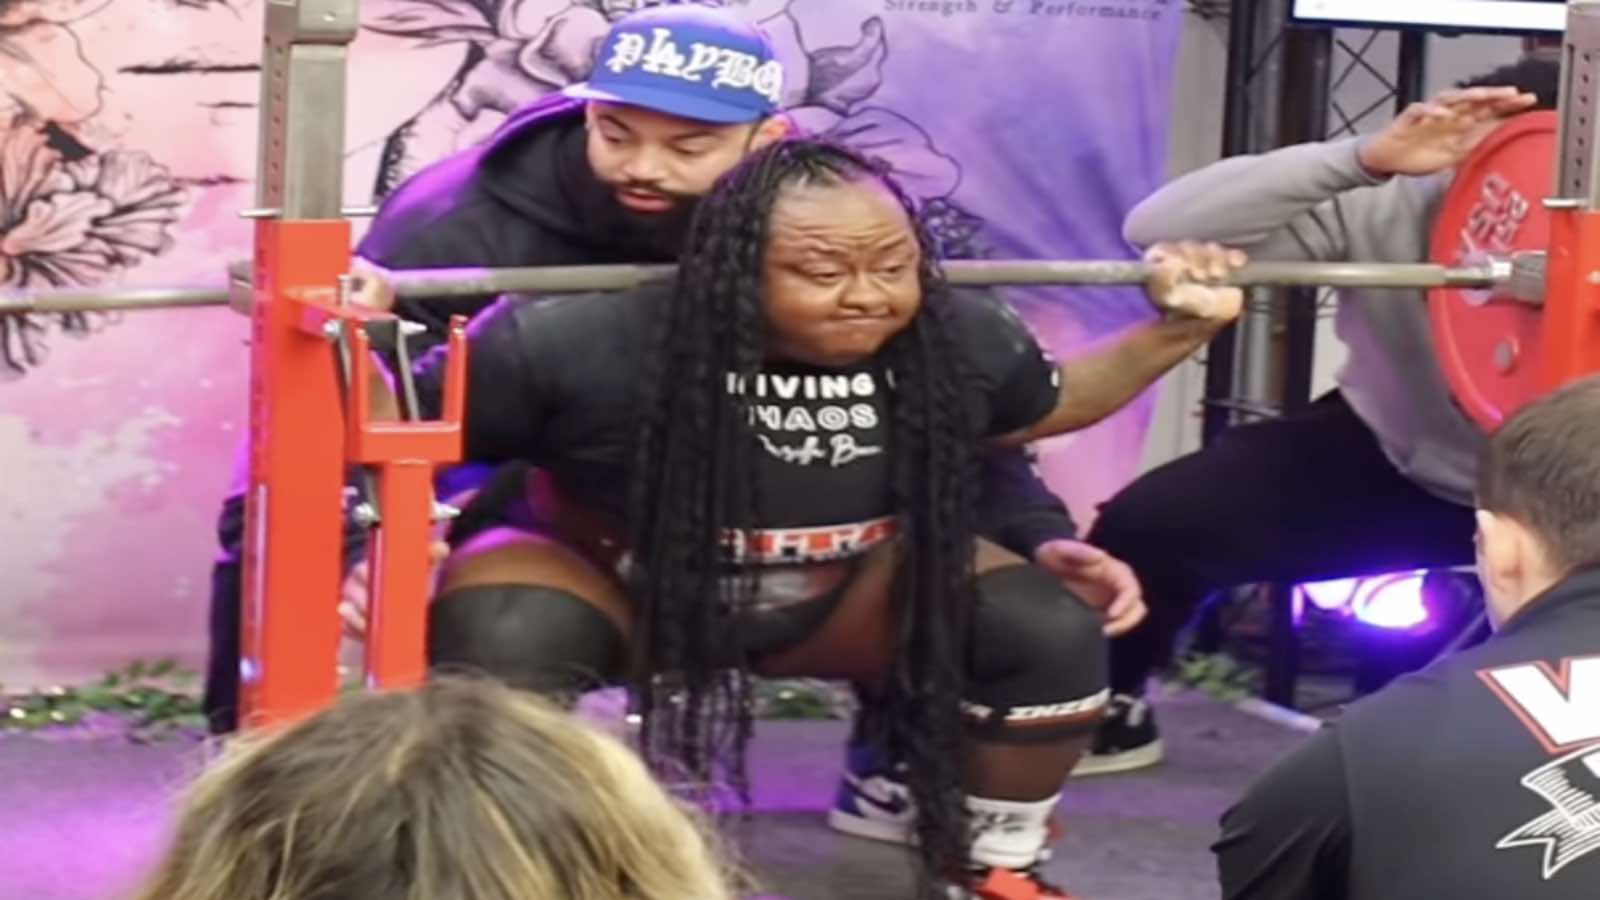 sherine-marcelle-(90kg)-scores-all-time-raw-world-record-squat-of-262.3-kilograms-(579-pounds)-–-breaking-muscle